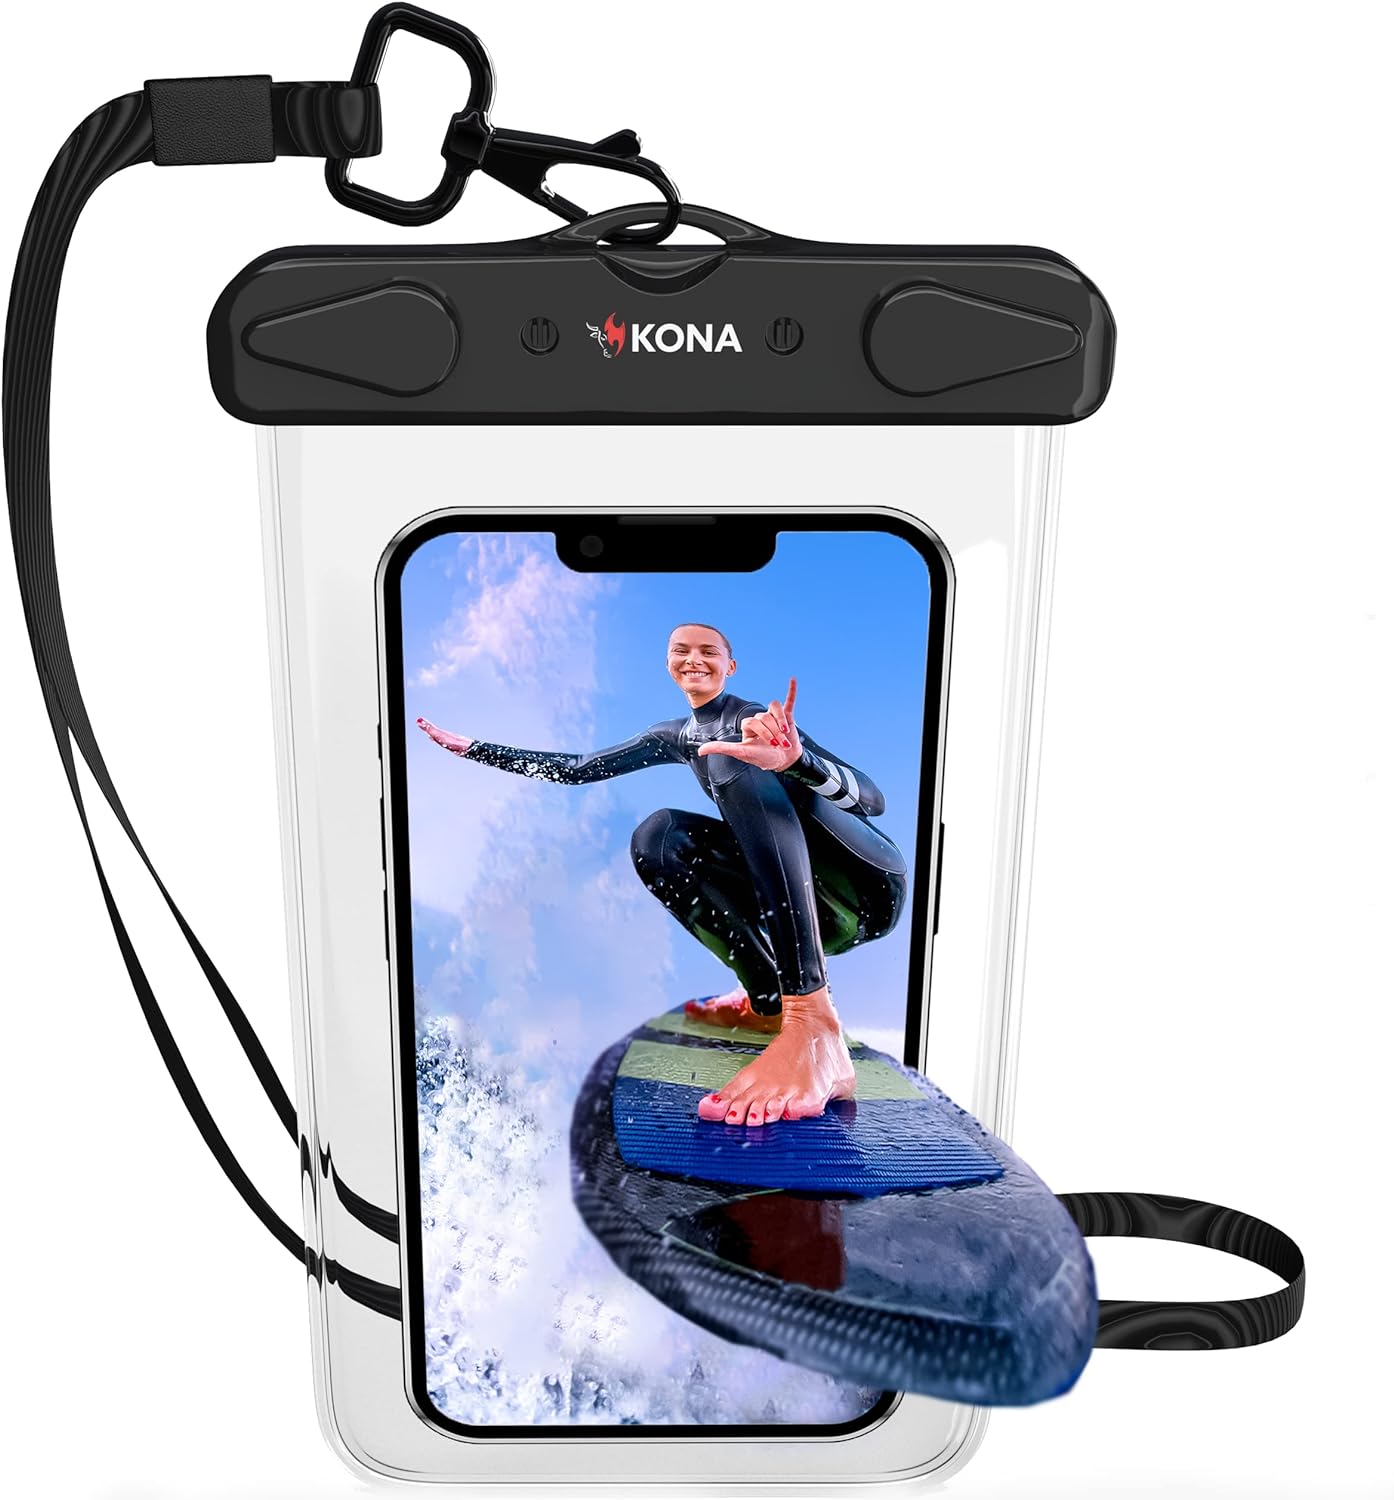 Kona Submariner Large Waterproof Phone Pouch - Swipe Sideways On Any iPhone, Samsung To Take Photos - Pouch Bag For Cell Phones with Case Up to 7.2 inch Diagonal